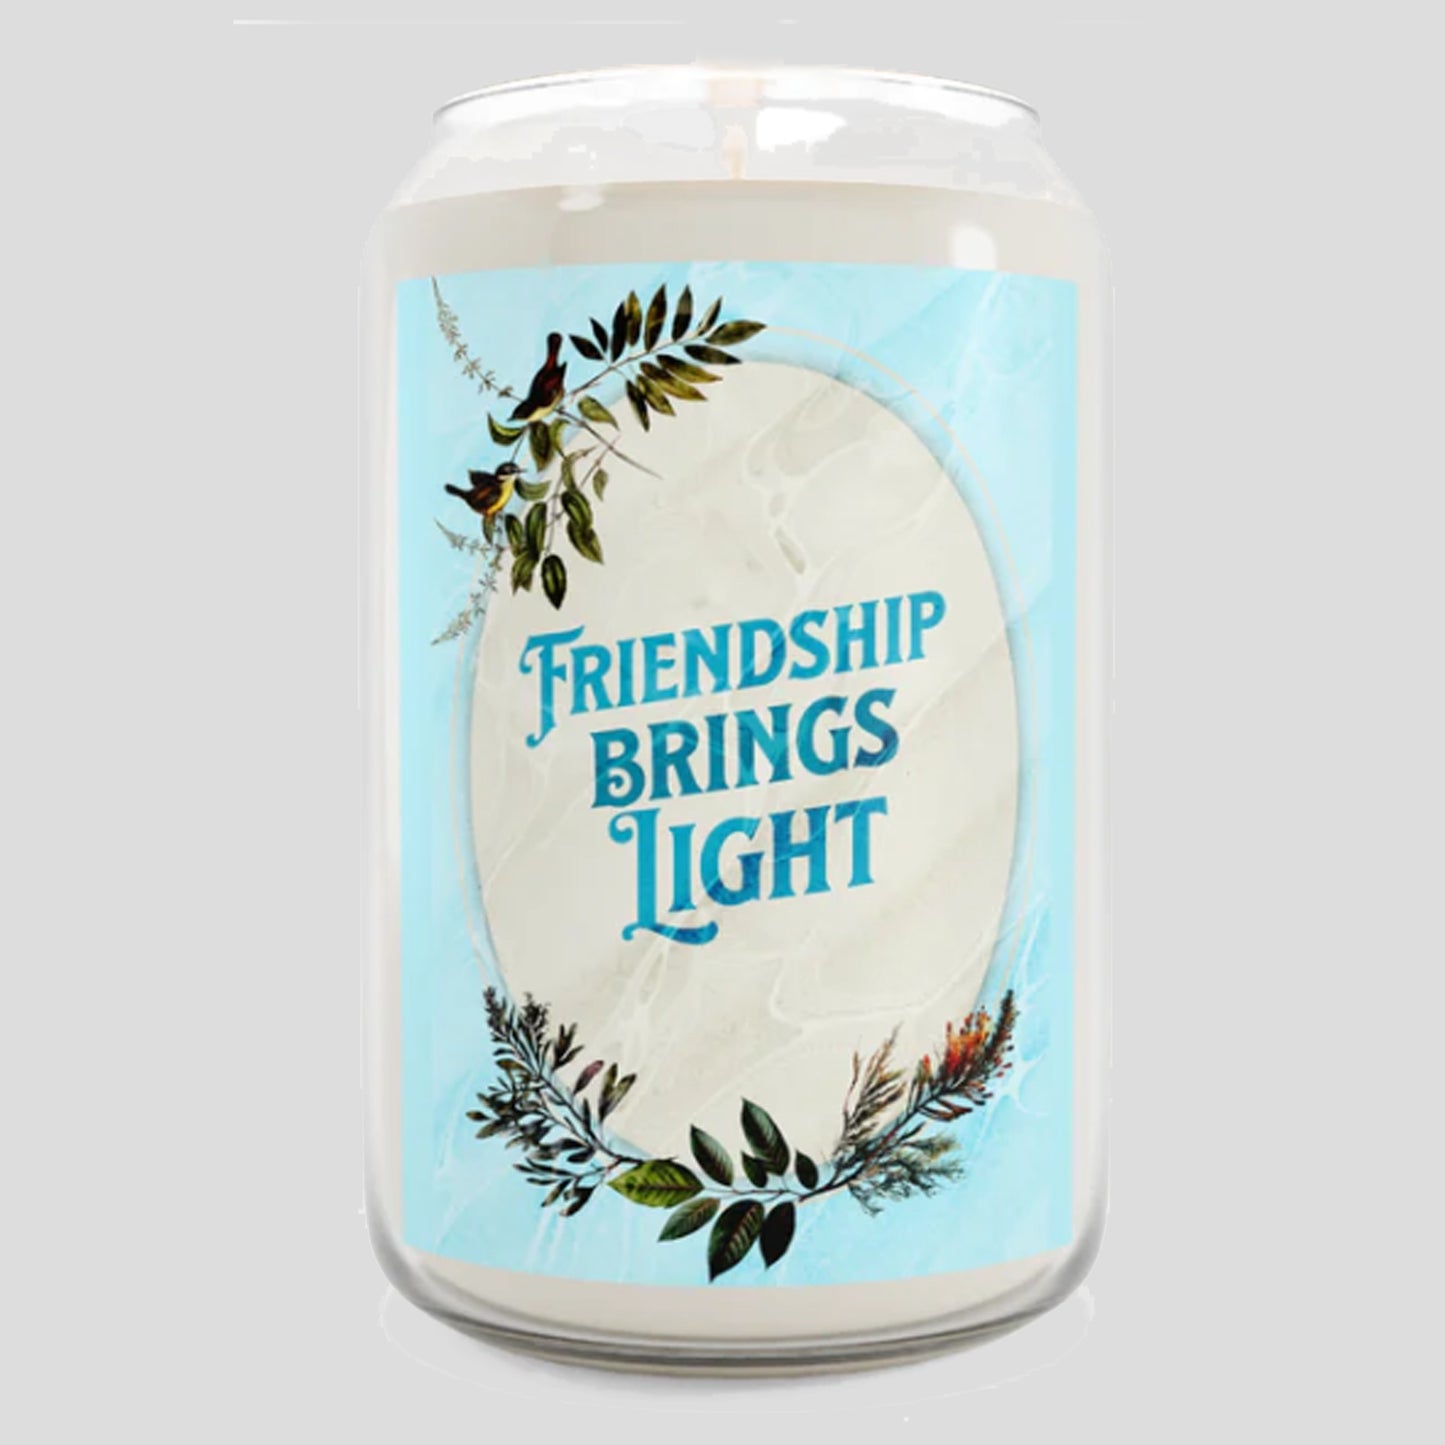 OOI-Scented Friendship Candle, 13.75oz (Extra Large)